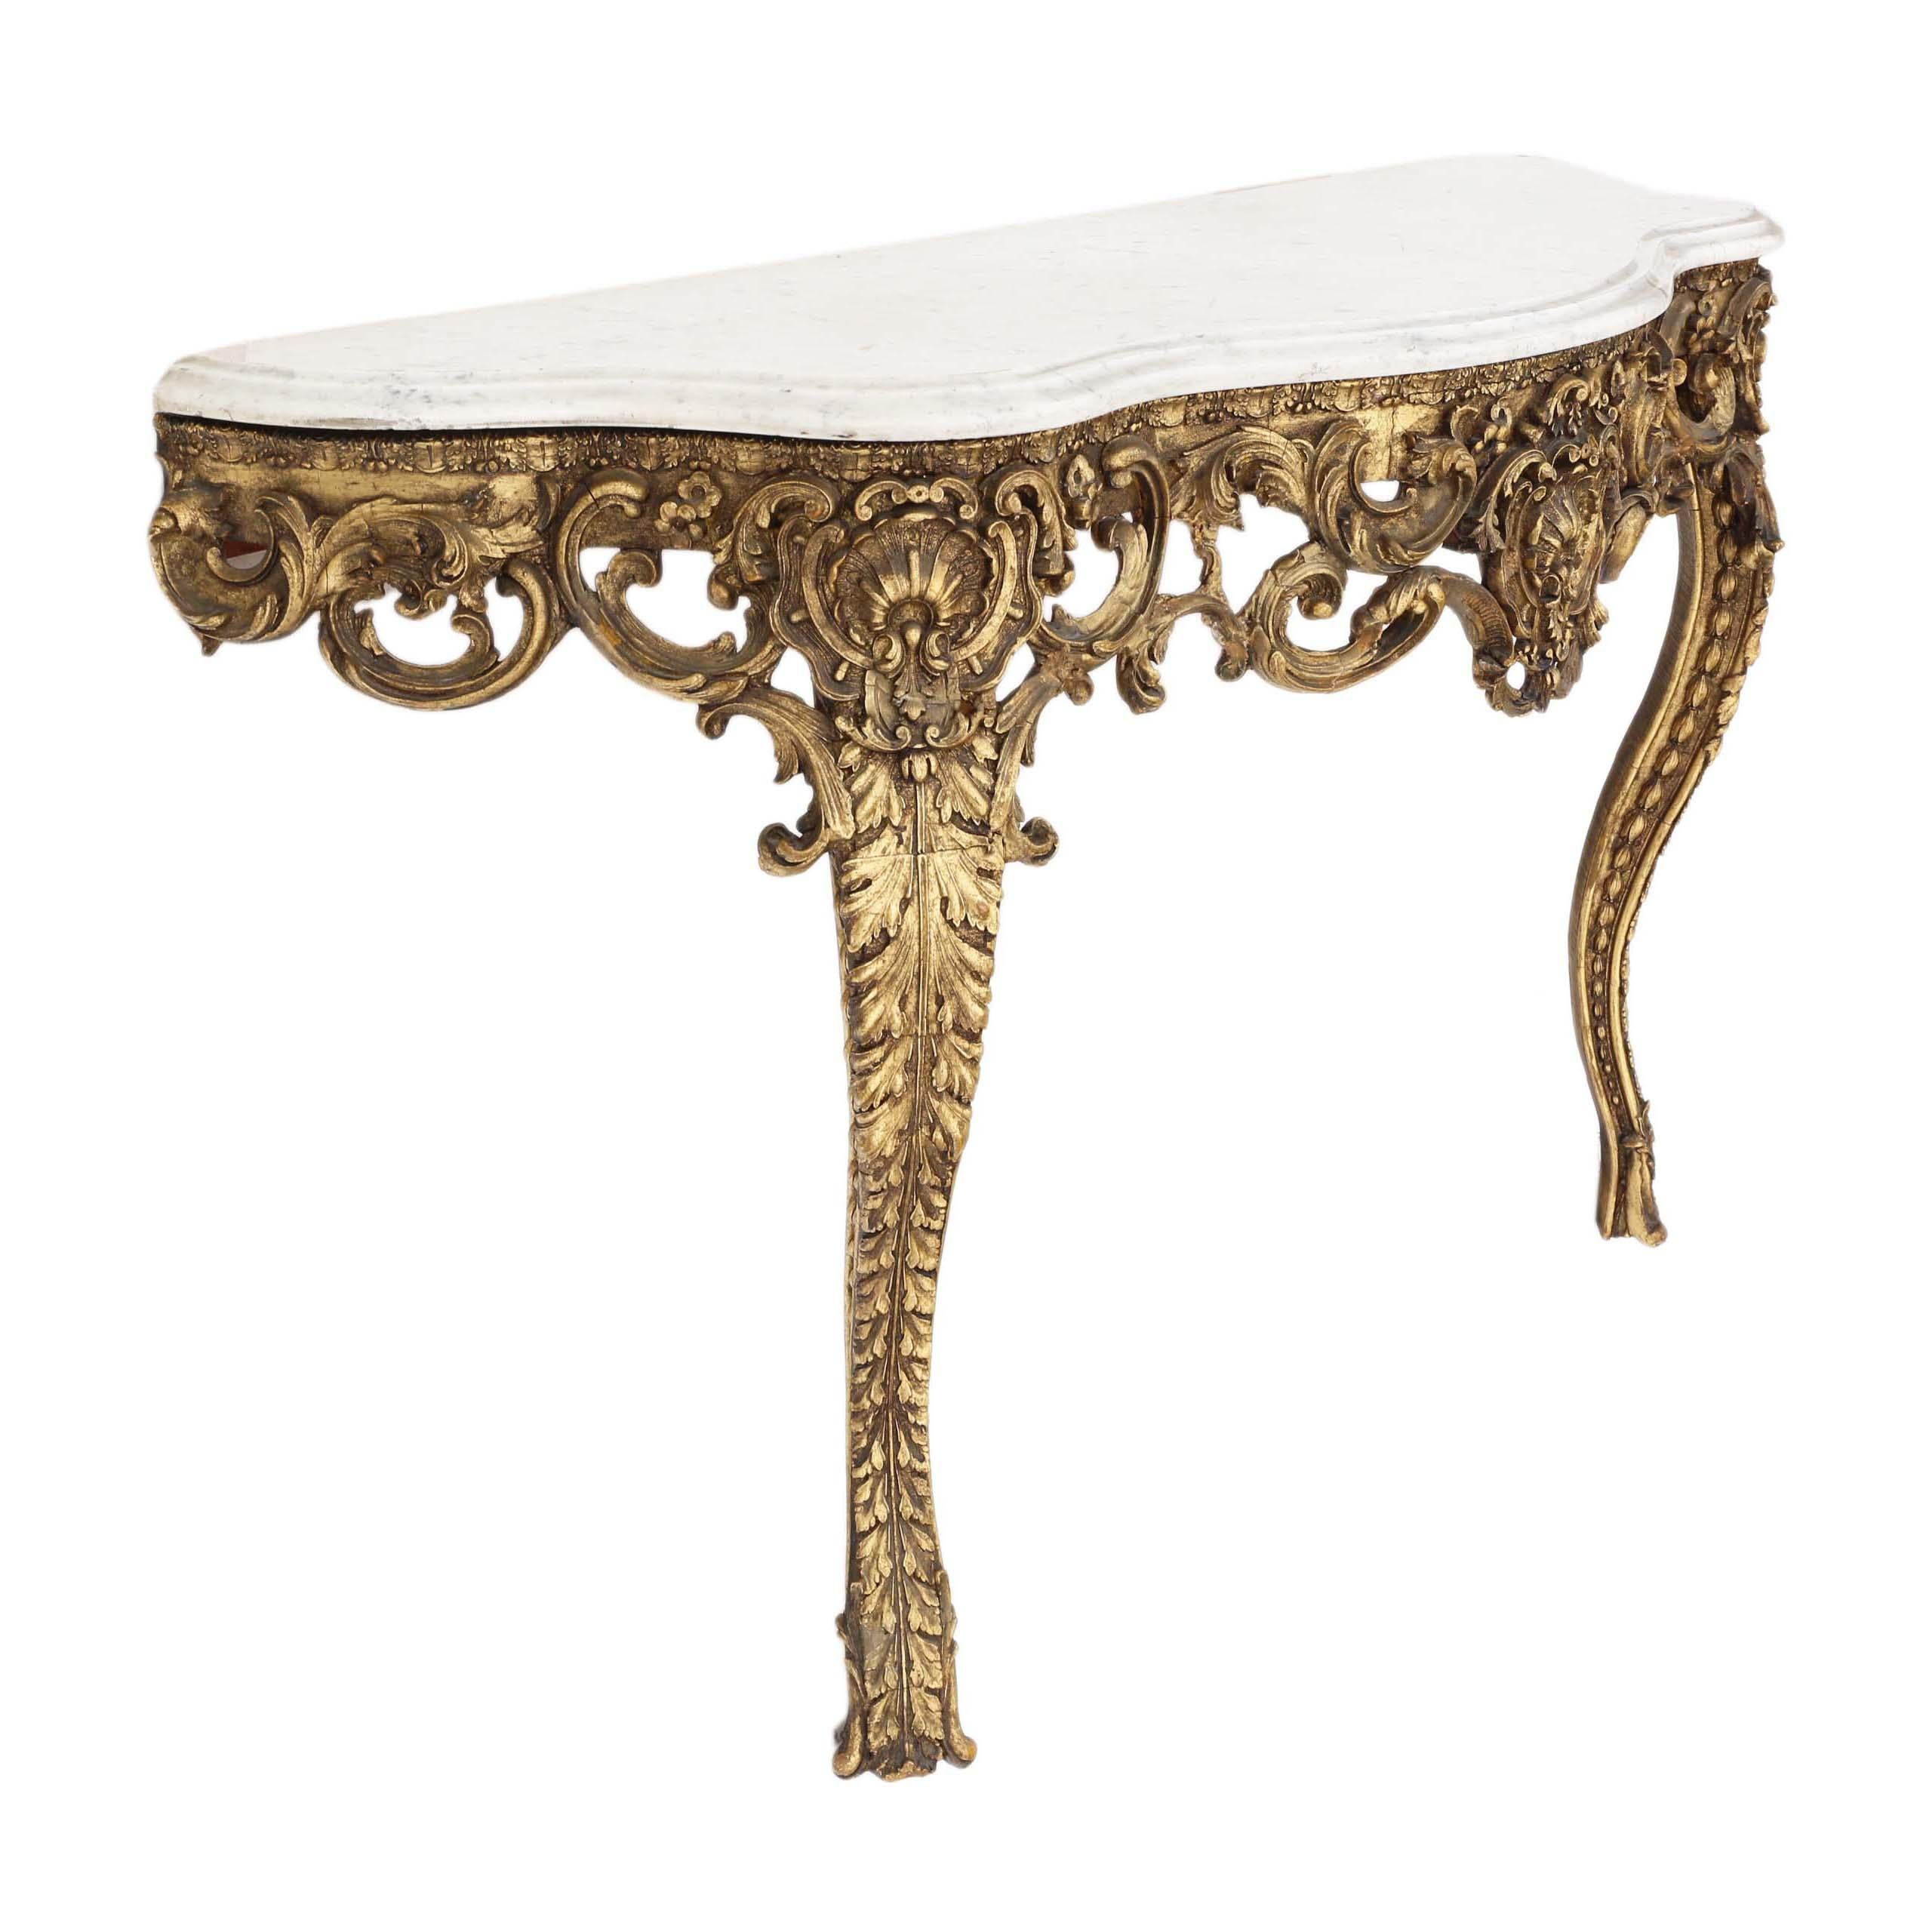 Regency Revival Antique Large Gilt and Marble Console Table